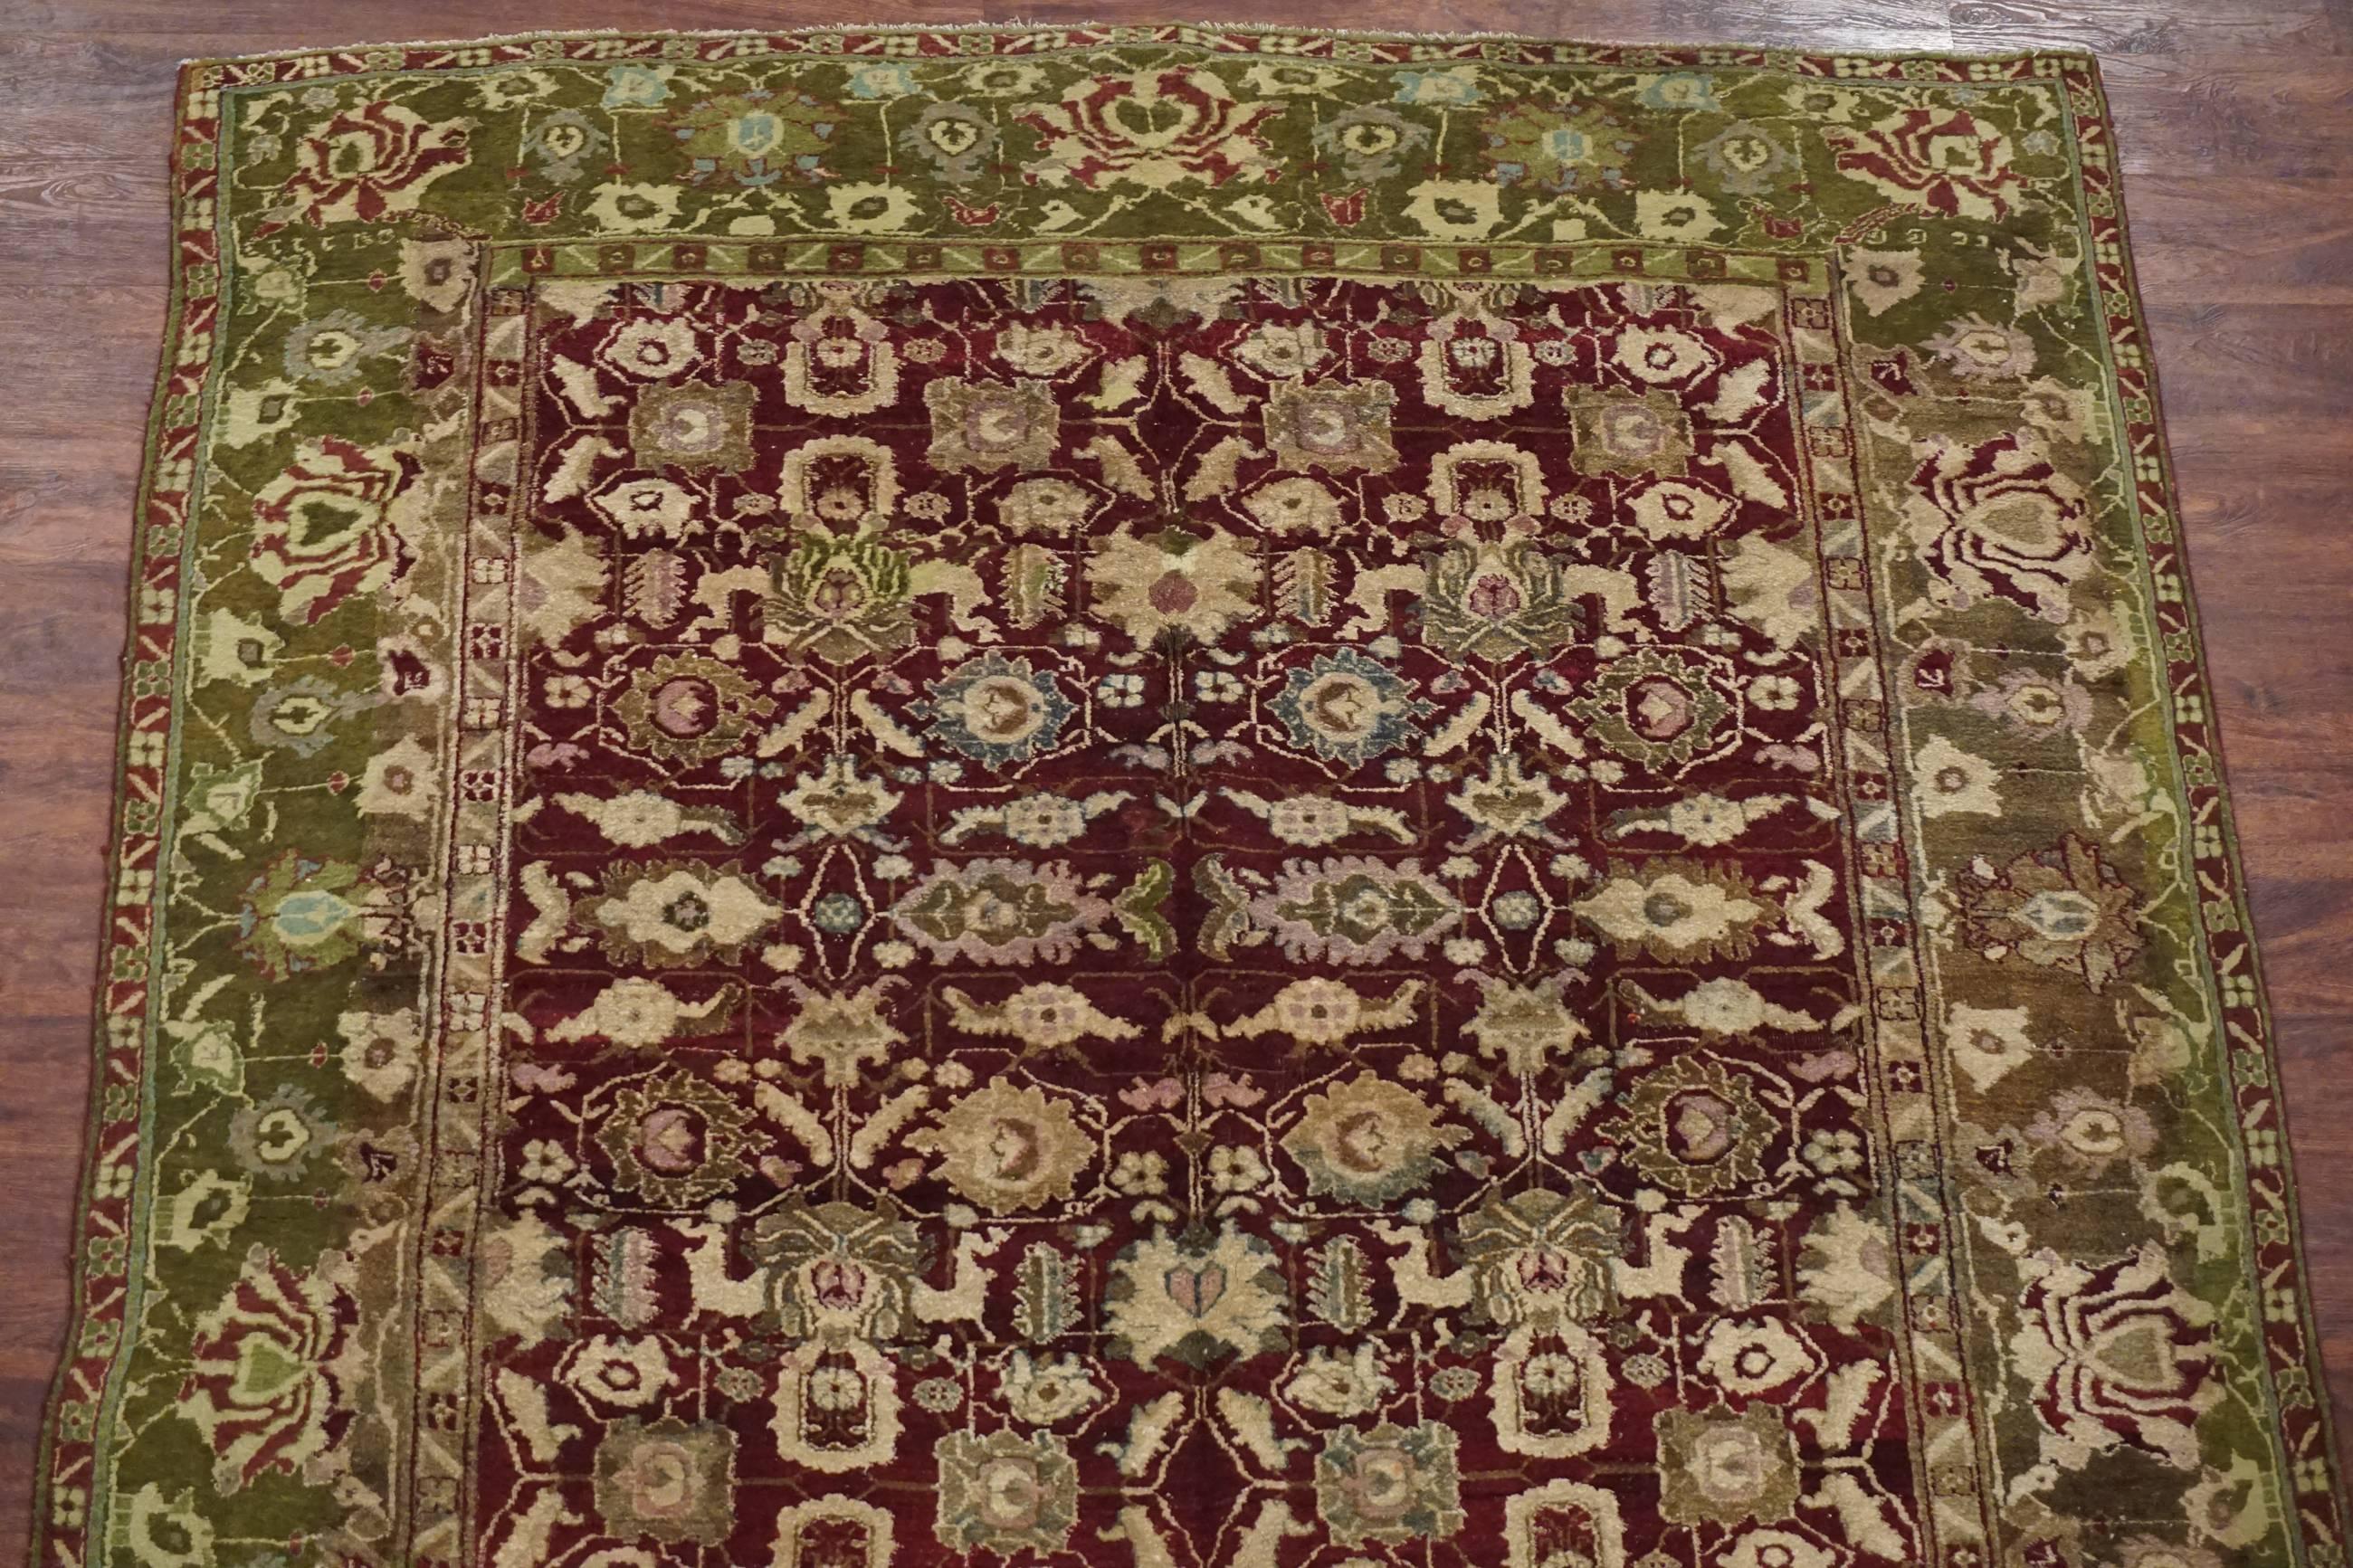 Antique Indian Agra Rug, circa 1880 In Excellent Condition For Sale In Northridge, CA